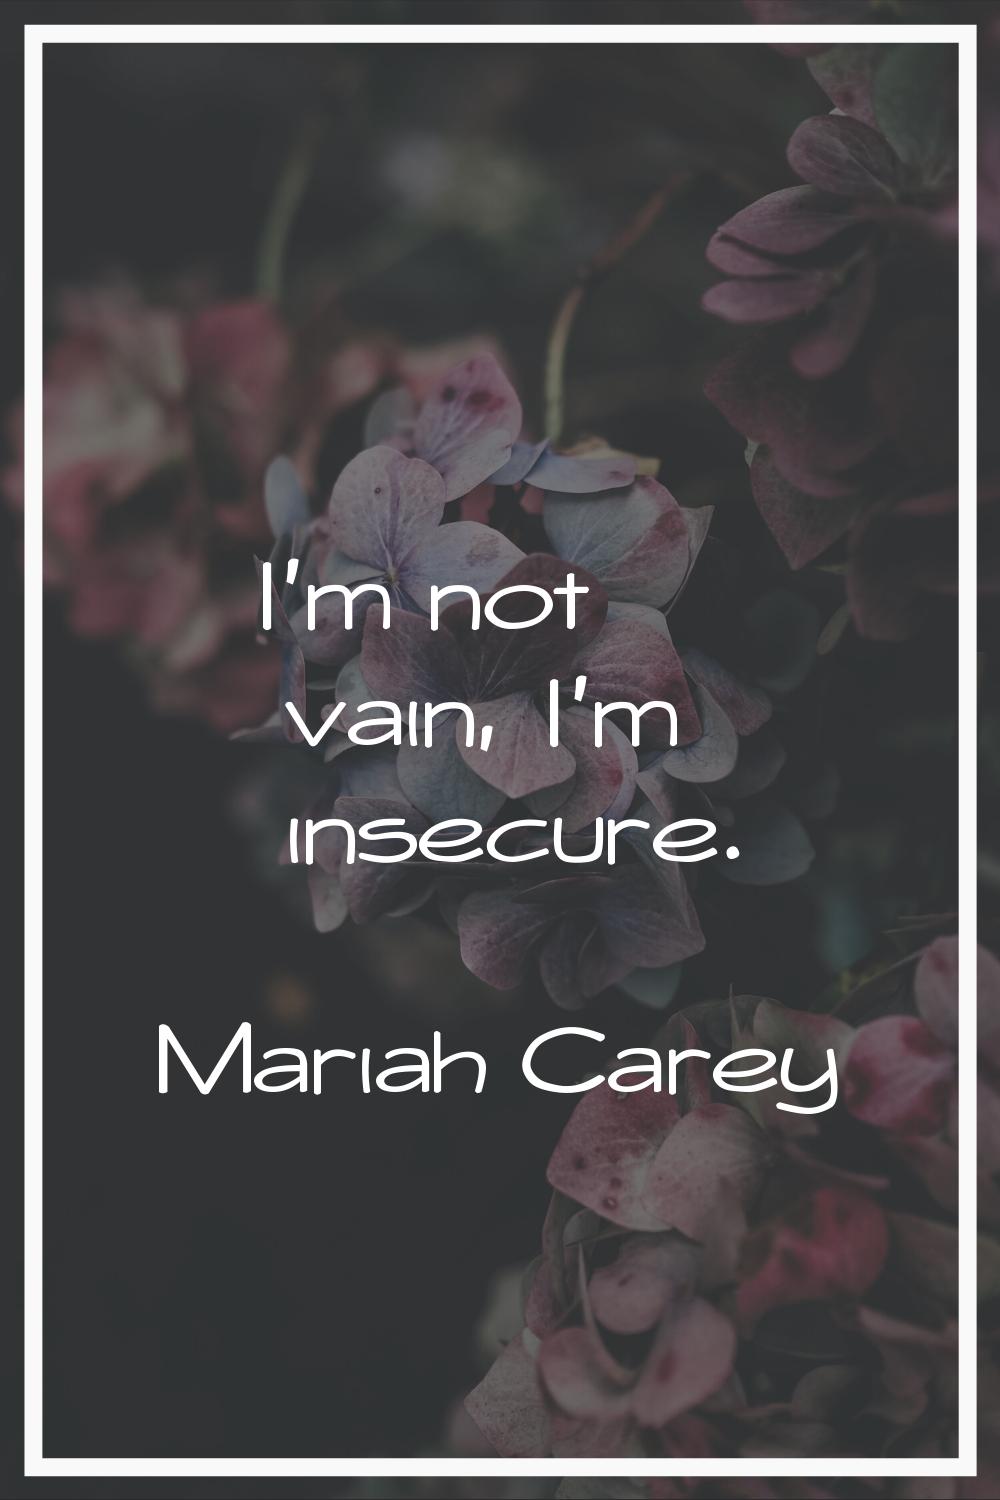 I'm not vain, I'm insecure.